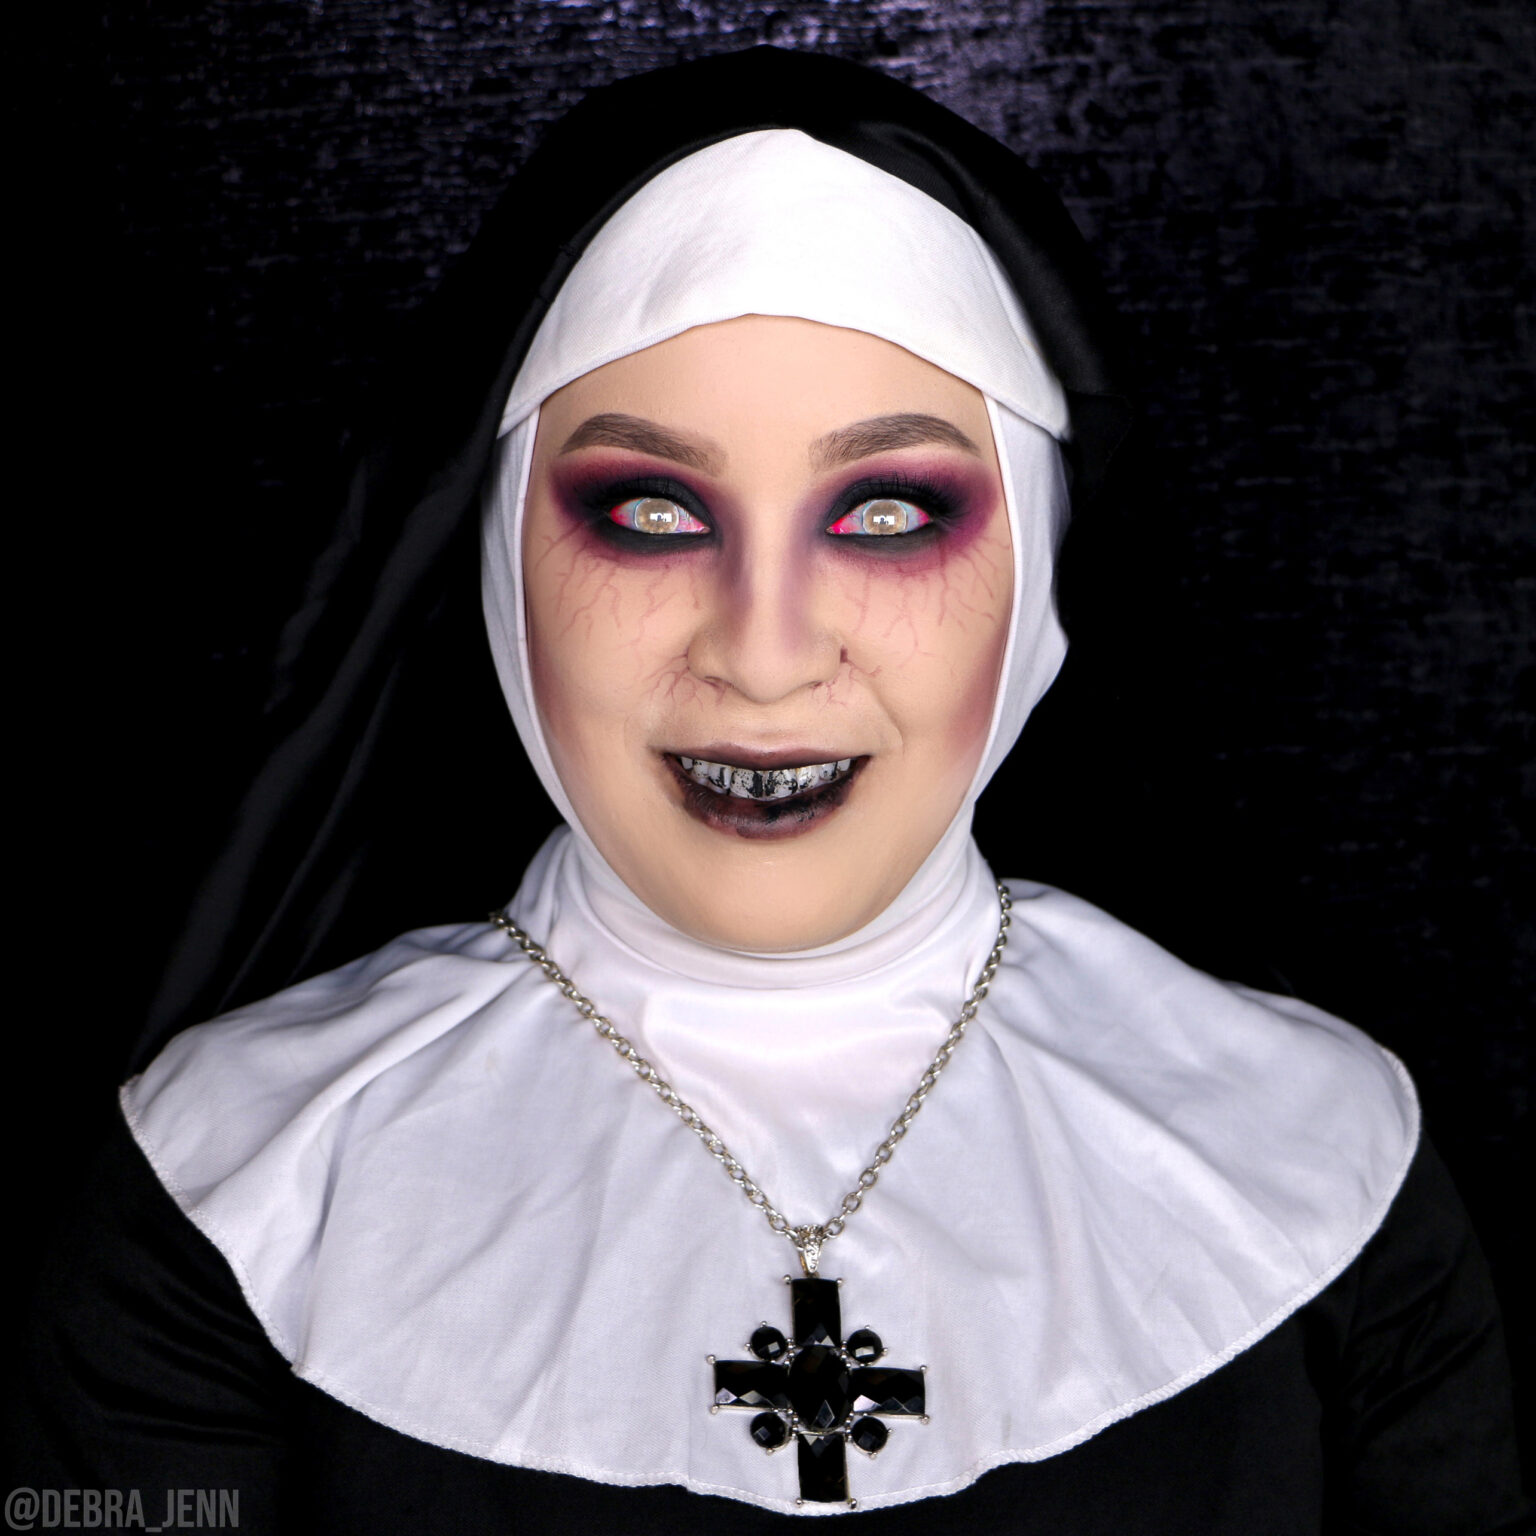 The Nun Makeup Tutorial A Scary Sister Halloween Costume Video